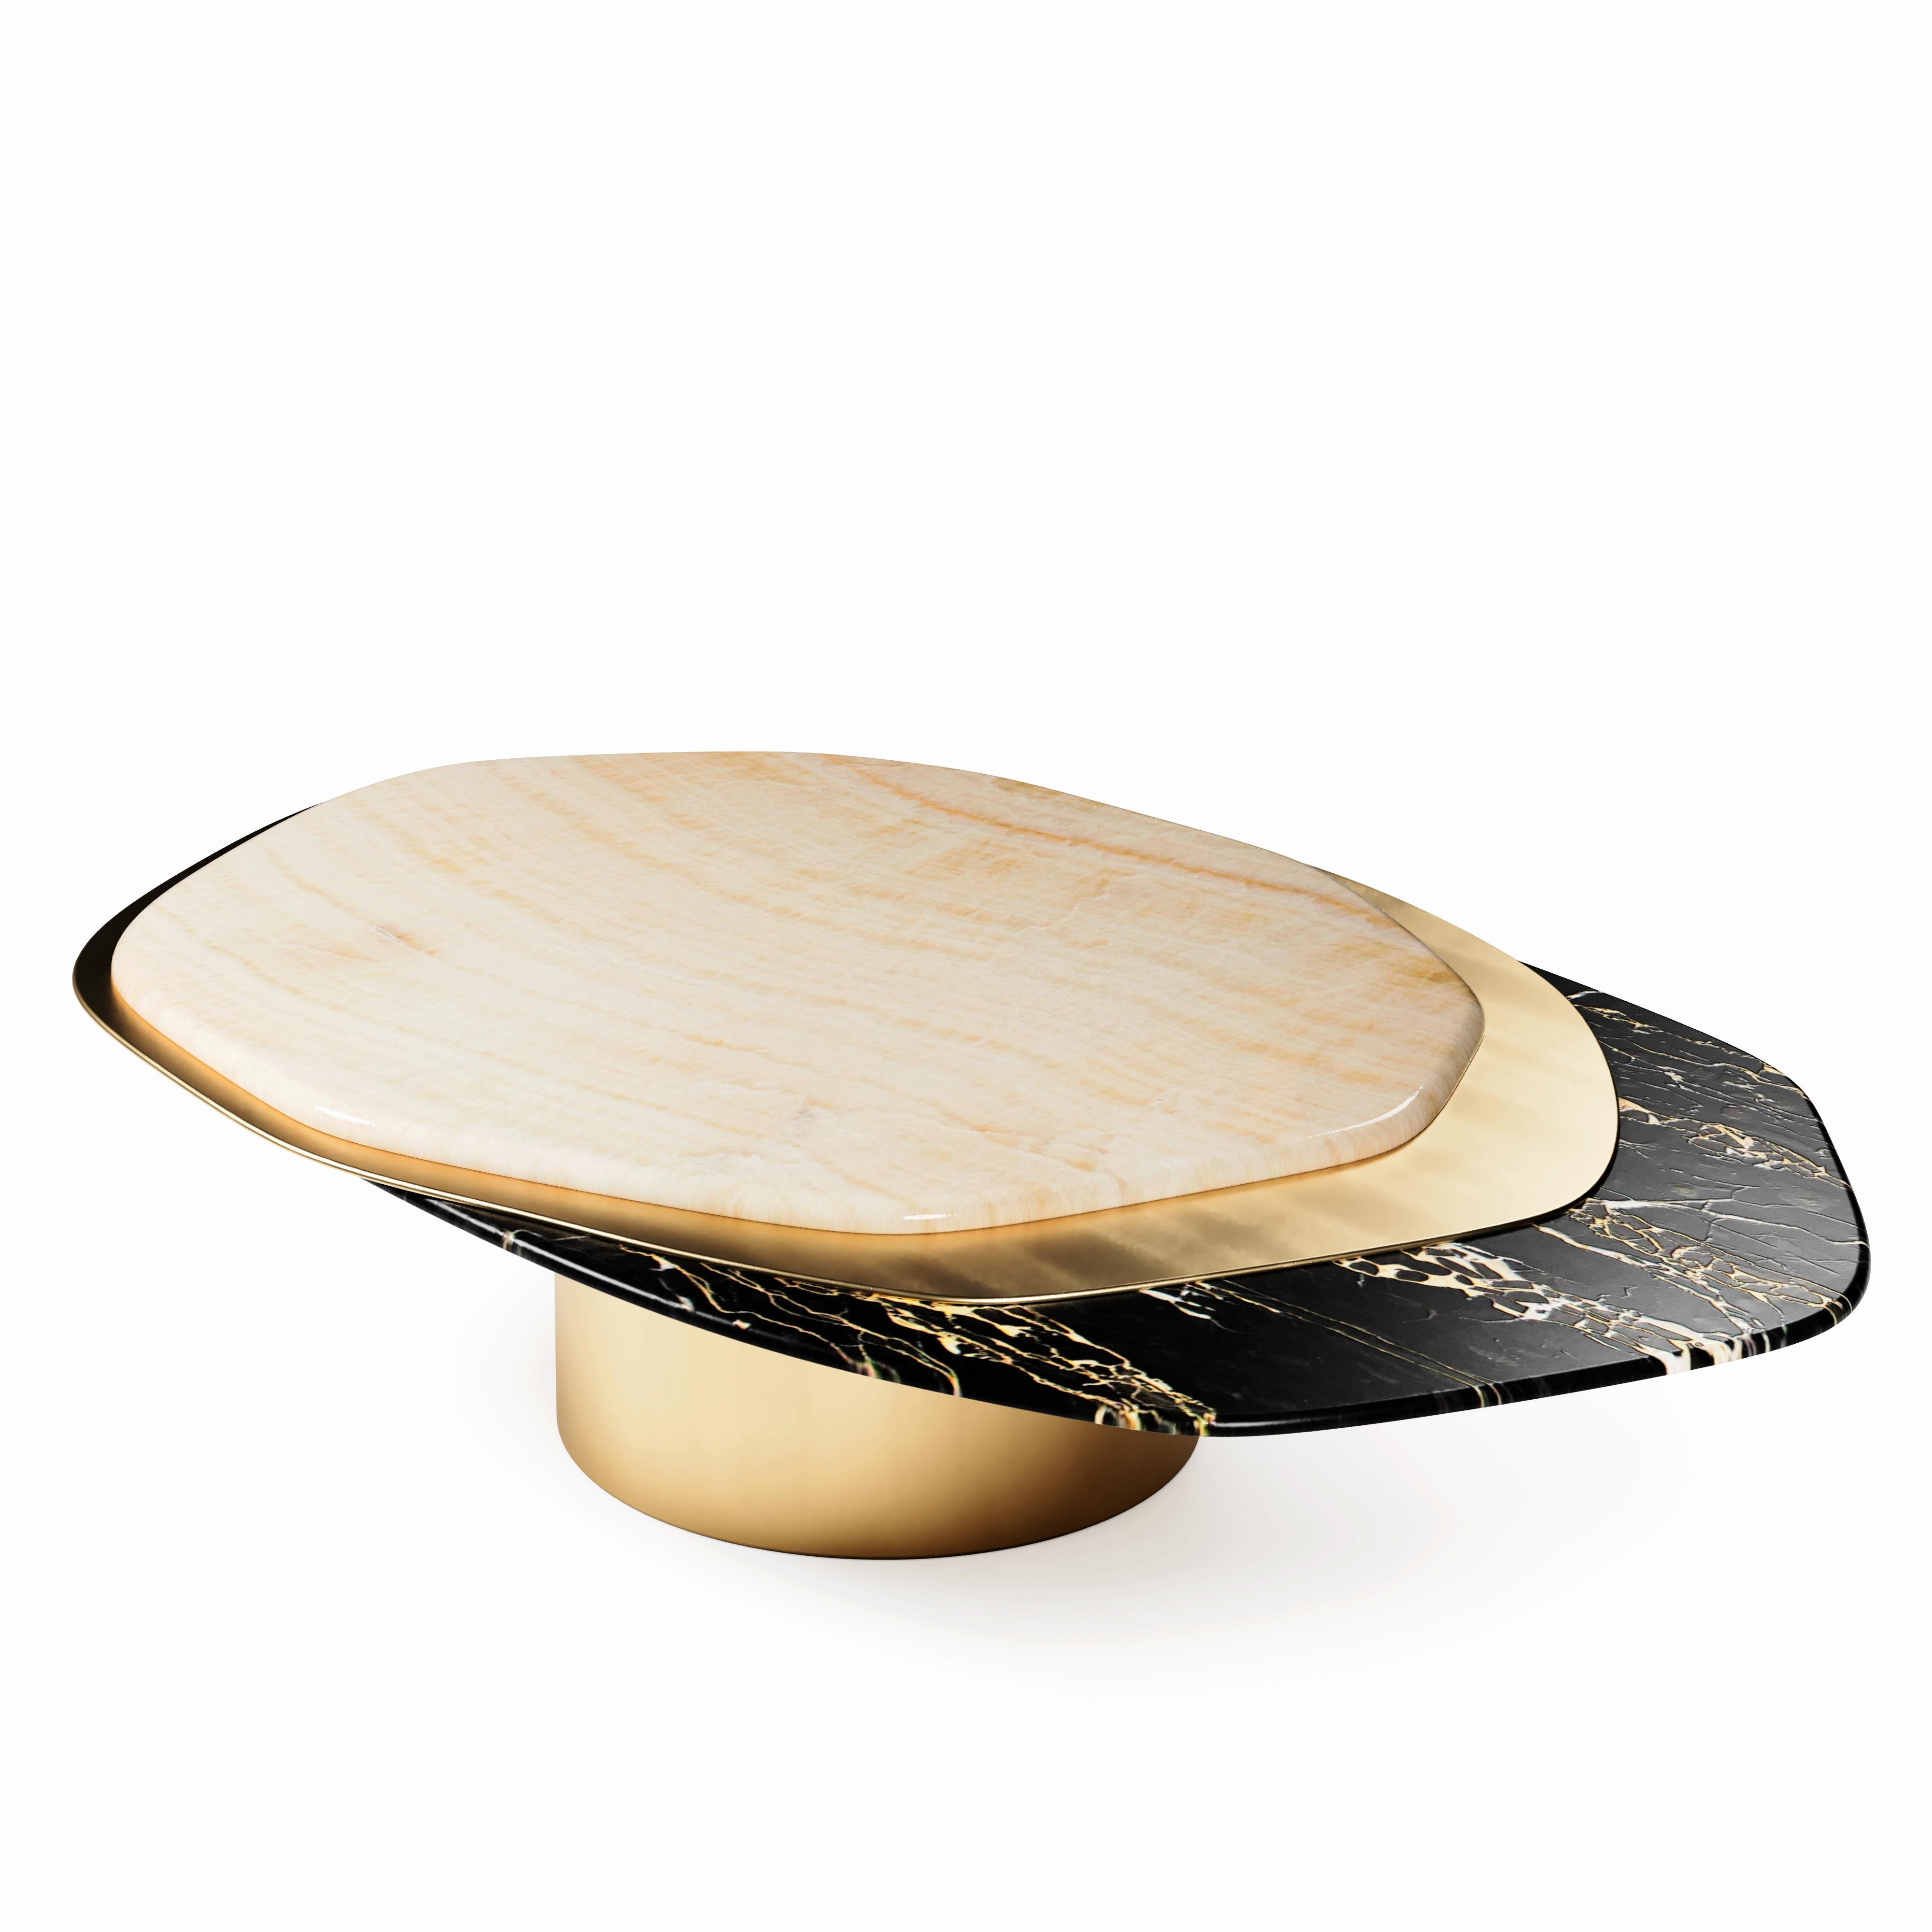 “The Epicure VI” Contemporary Center Coffee Table ft Nero Portoro Marble, Ivory Onyx and solid Brass in “Satin” finish.

Luxury doesn’t always follow the common patterns. Luxury goes beyond and almost like one of the best gourmets joins varied